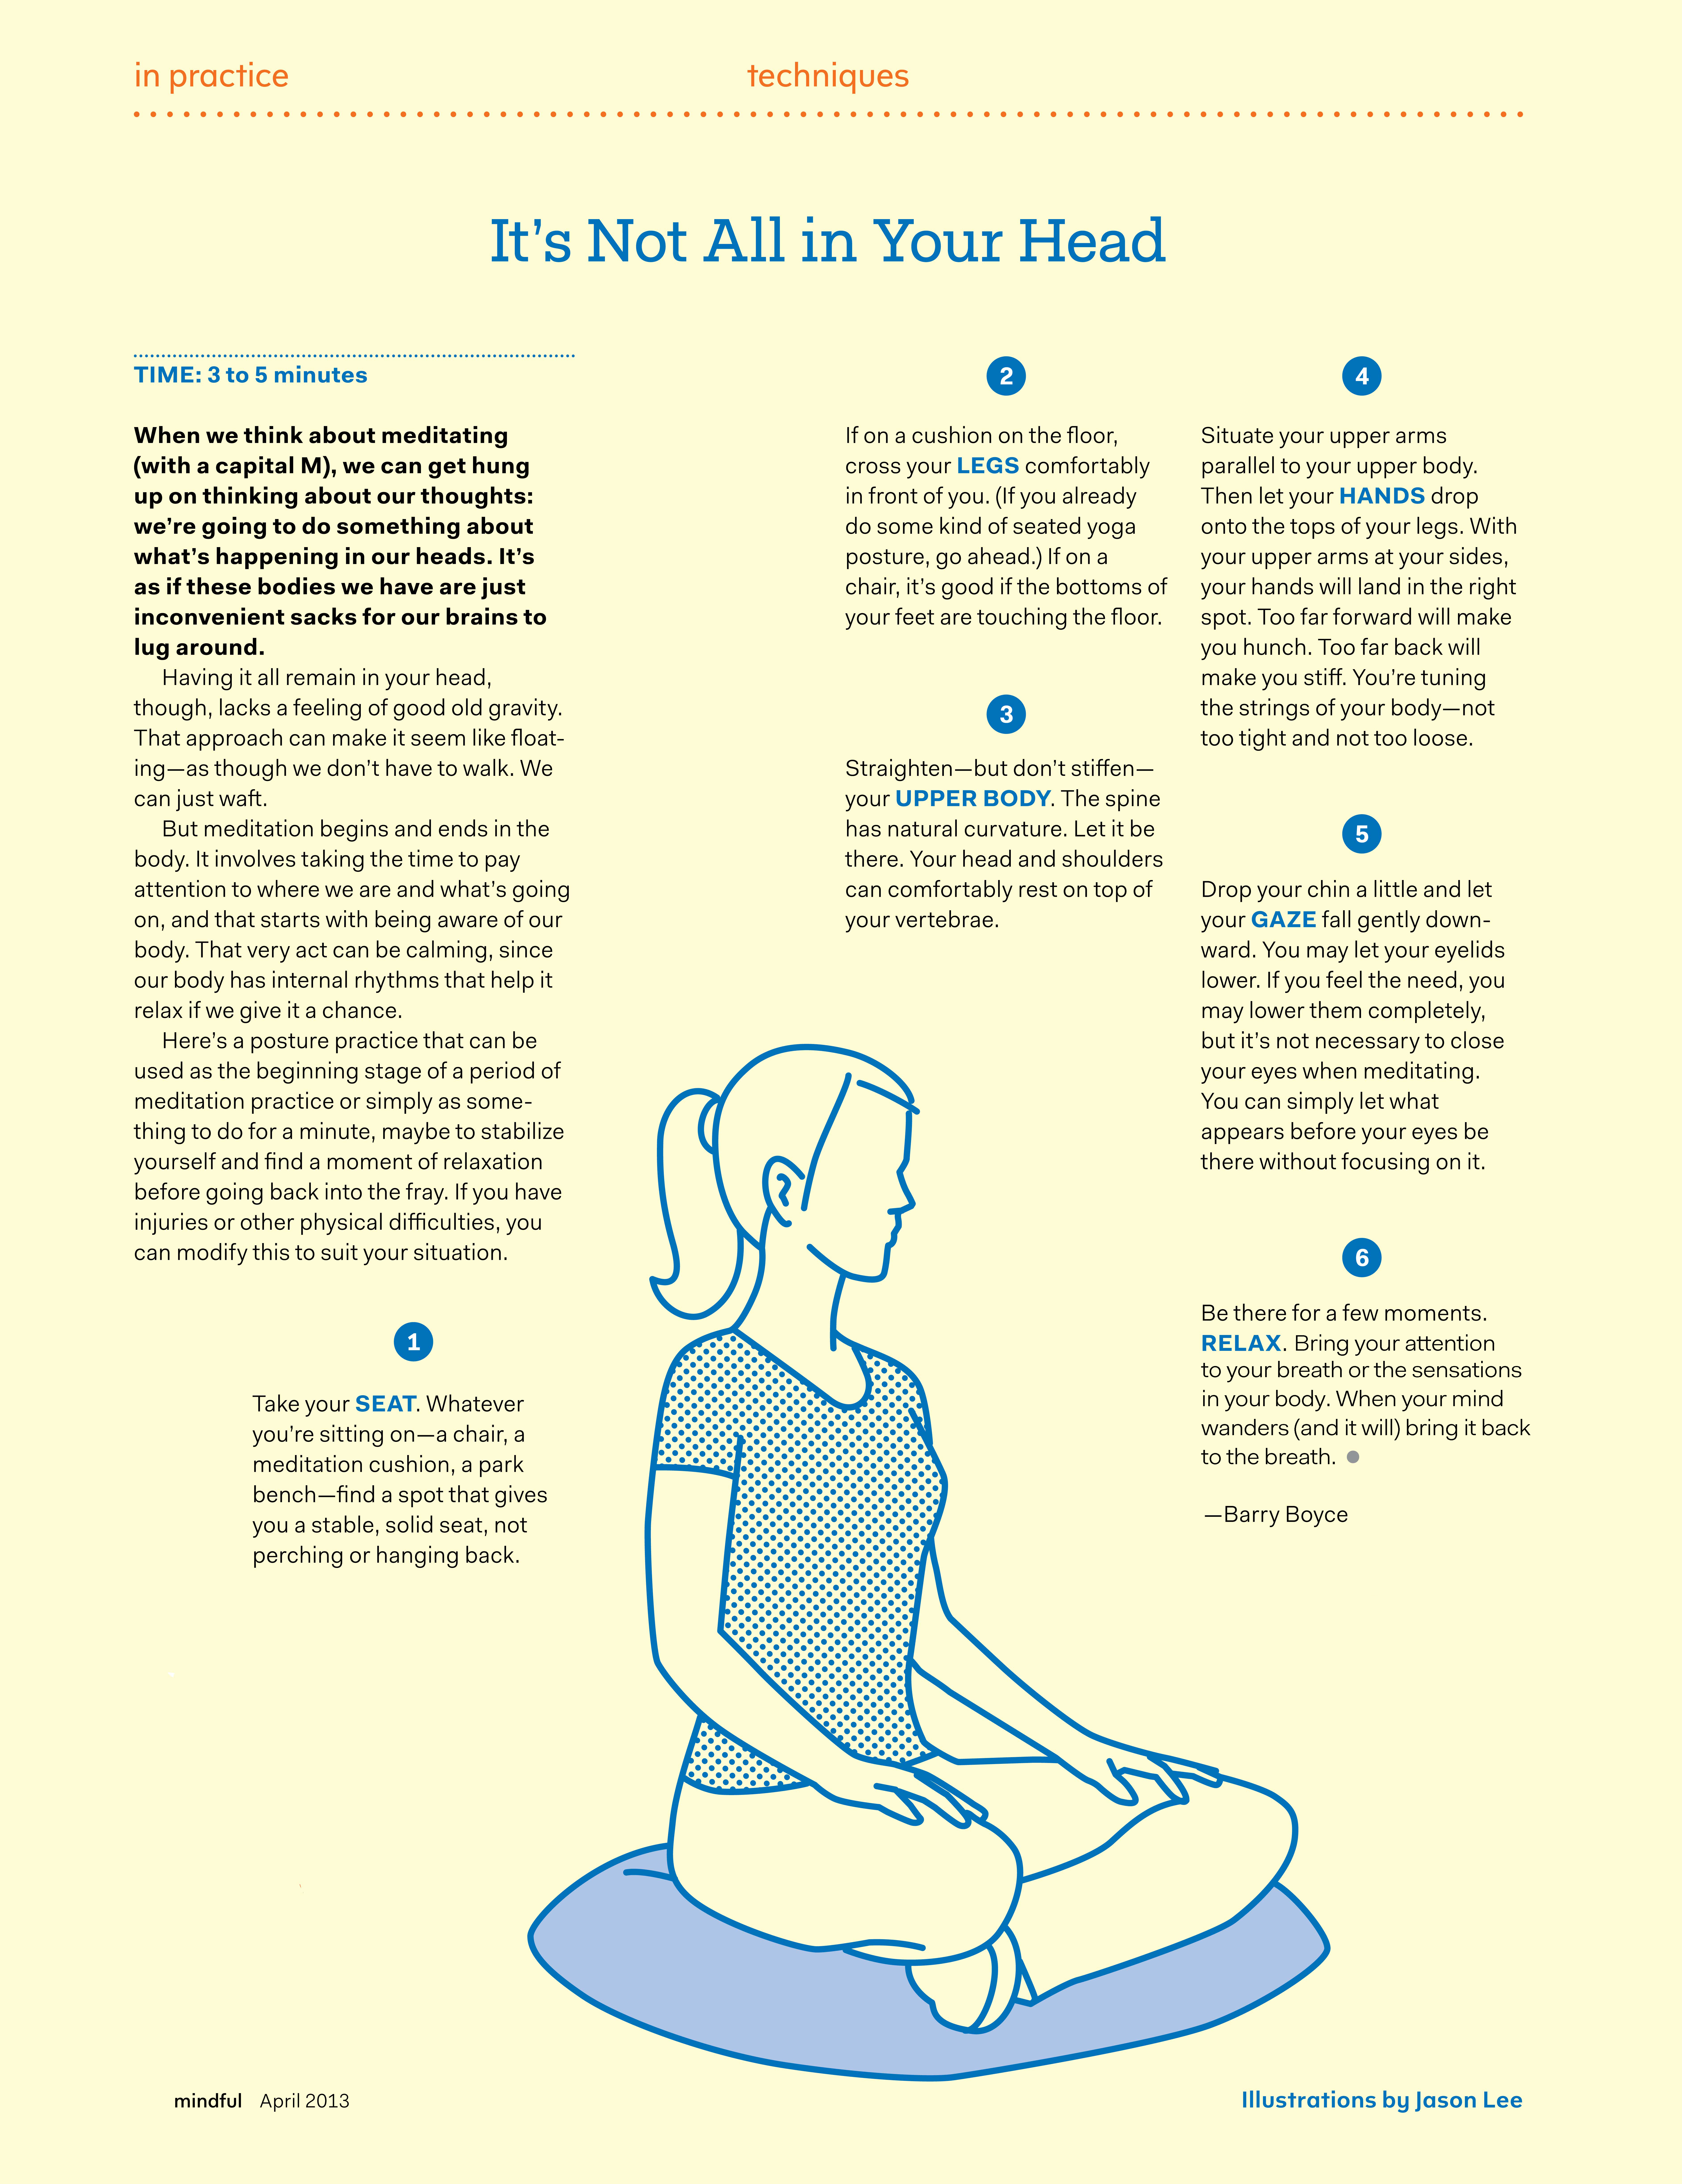 How To Practice Mindfulness Meditation - Mindful